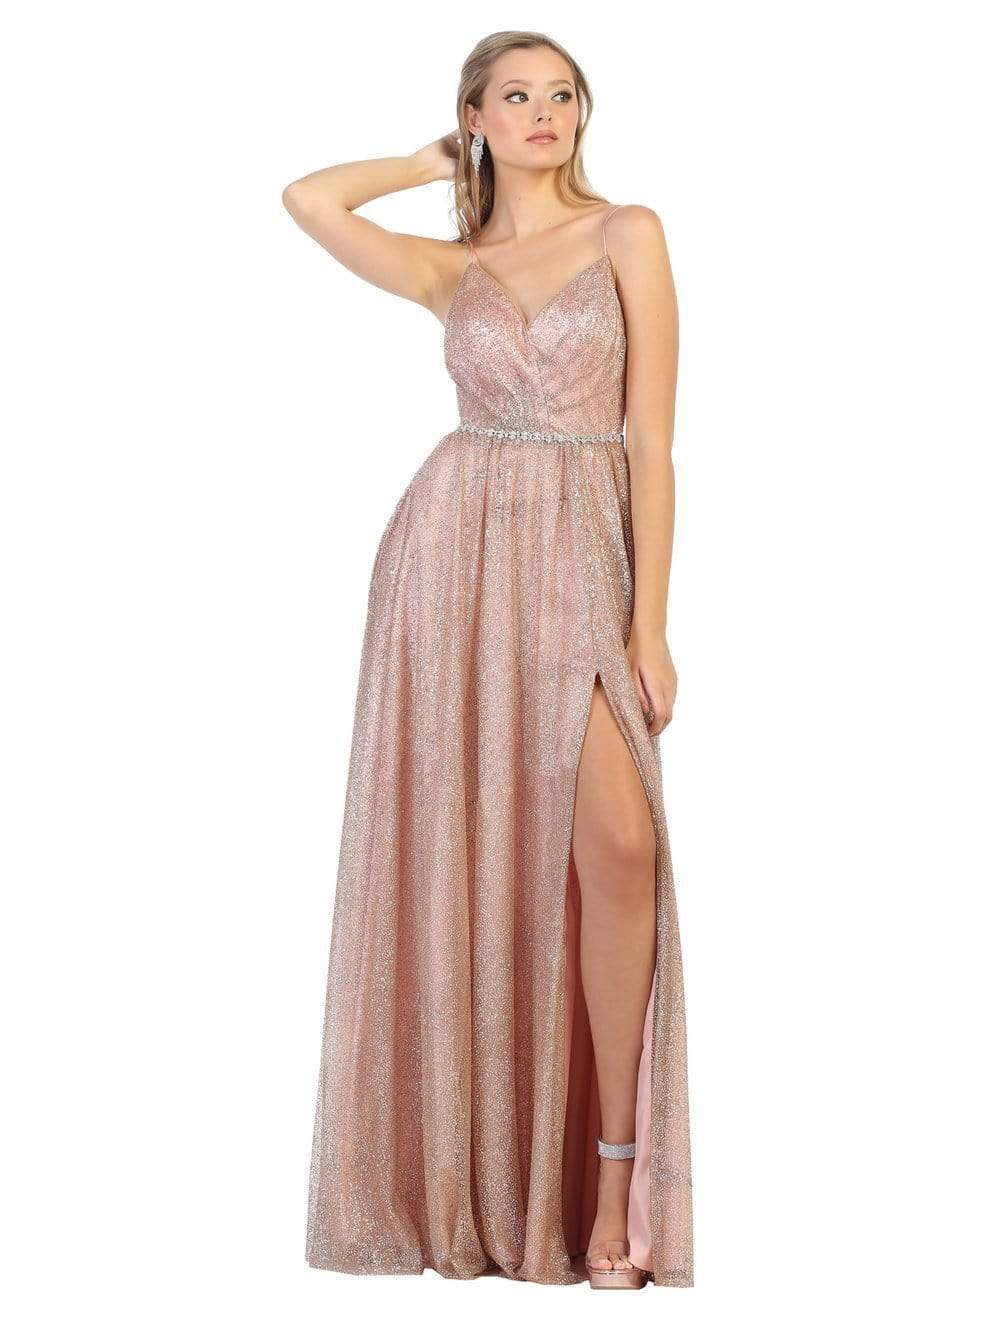 May Queen - RQ7792 Embellished V-neck A-line Gown Prom Dresses 4 / Rosegold